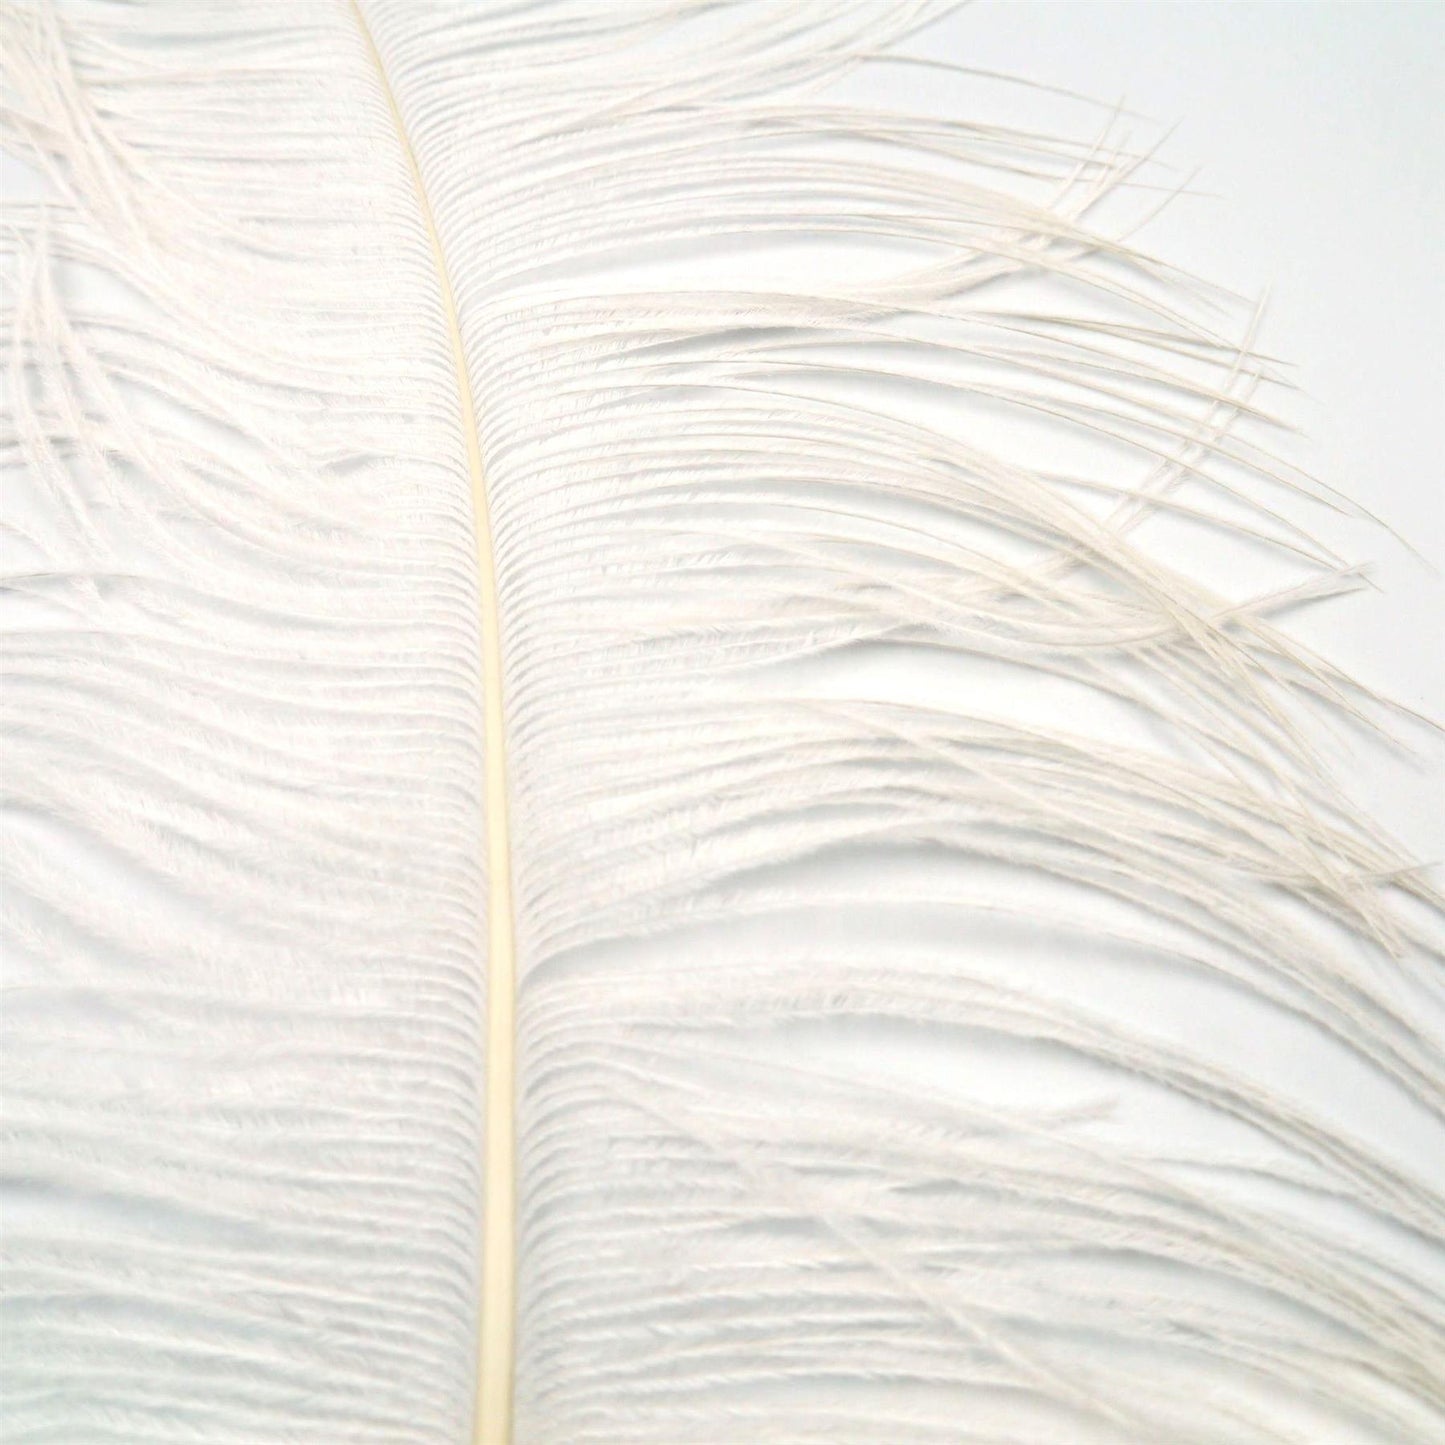 Ostrich Feather Plume 45 to 55cm FE017